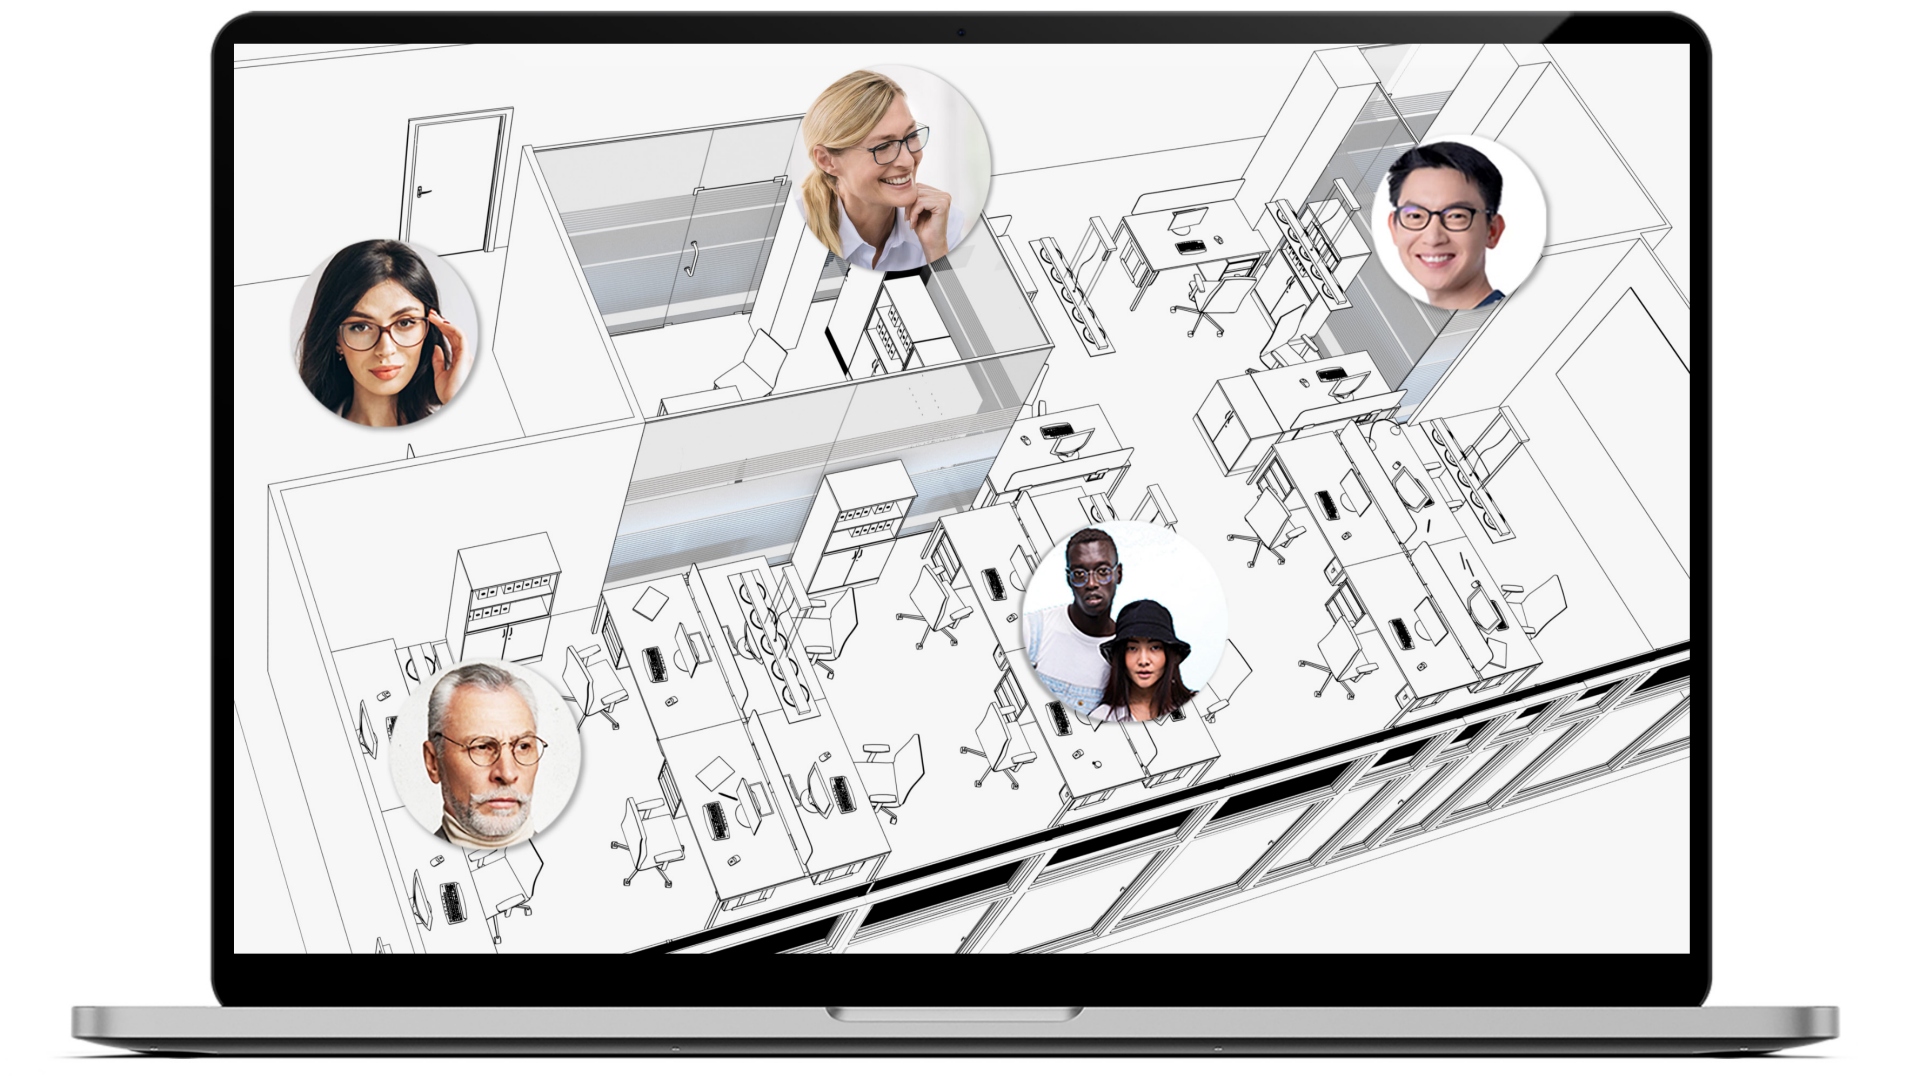 Laptop with an office layout drawing on the screen, showing where different co-workers are located. Each area has a small round image of different people all wearing ZEISS Office glasses.